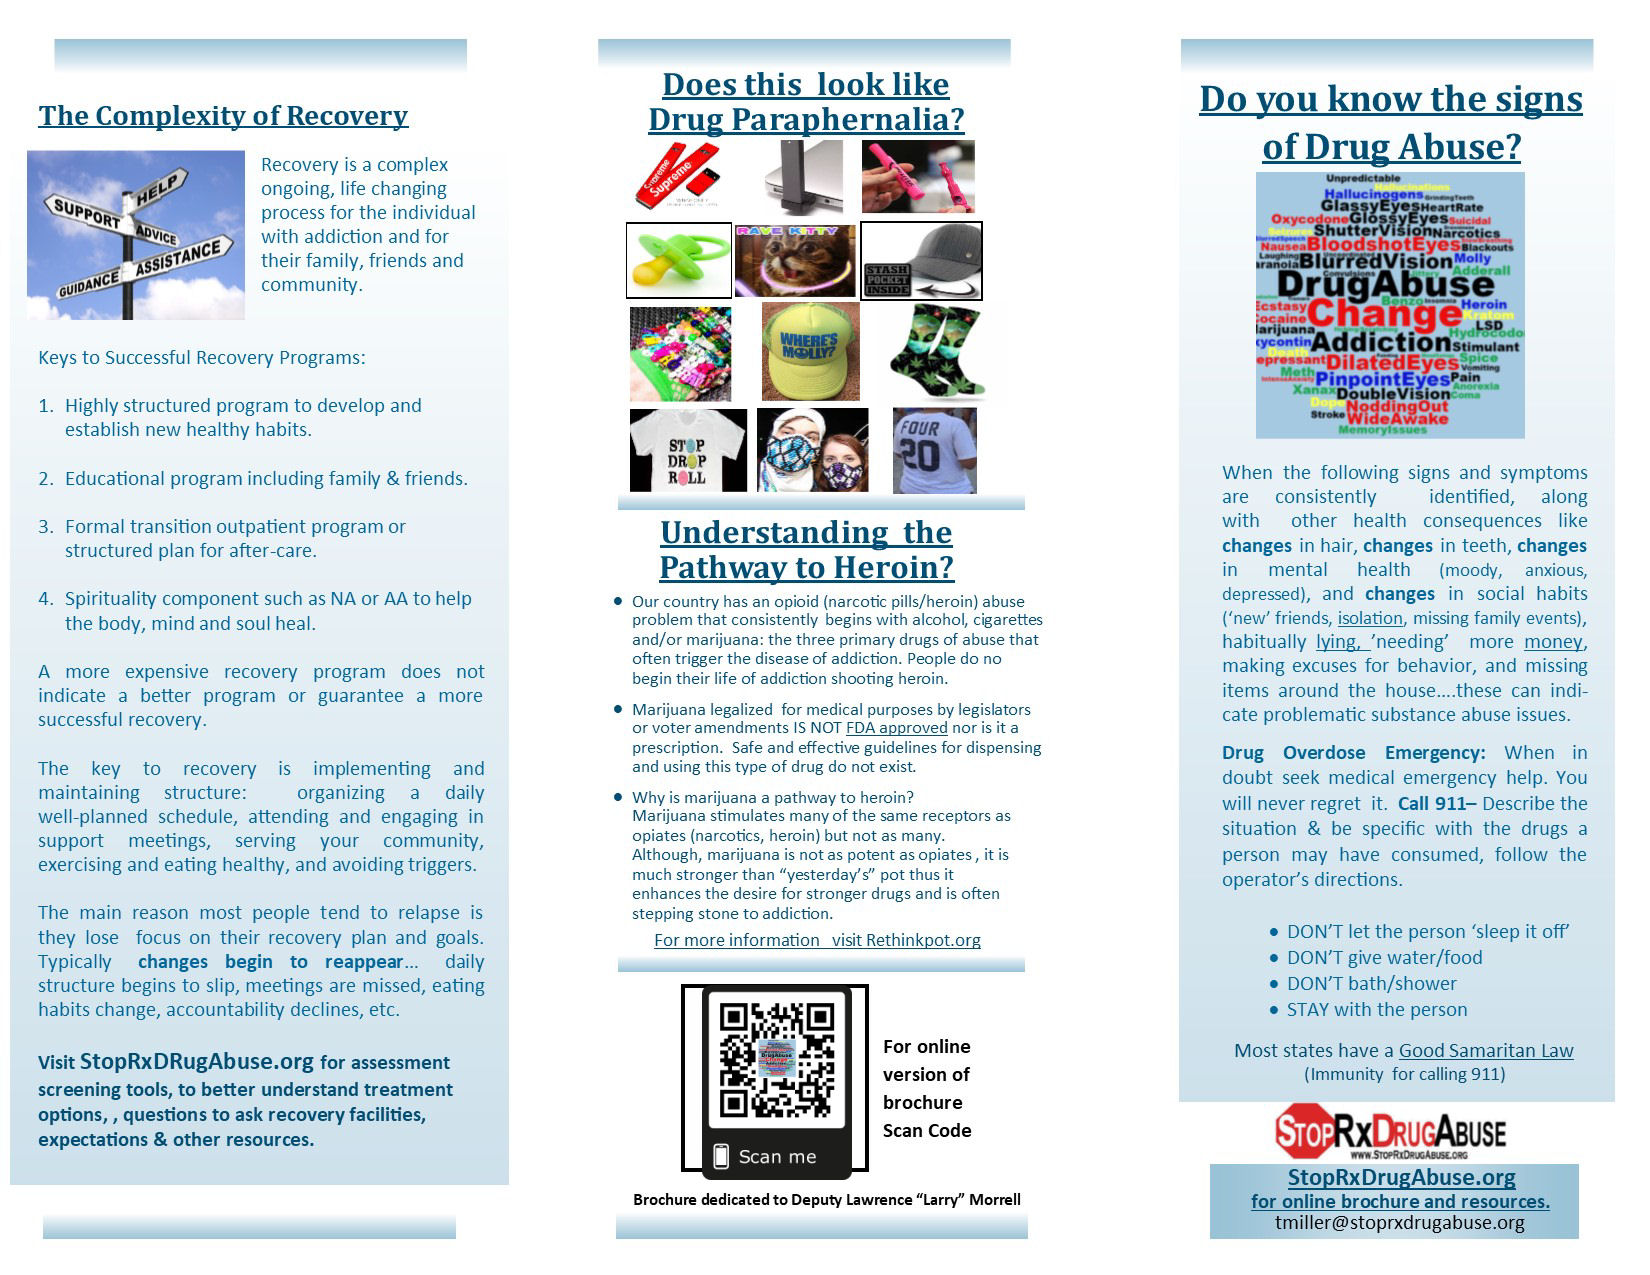 signs-of-abuse-brochure-stoprxdrugabuse